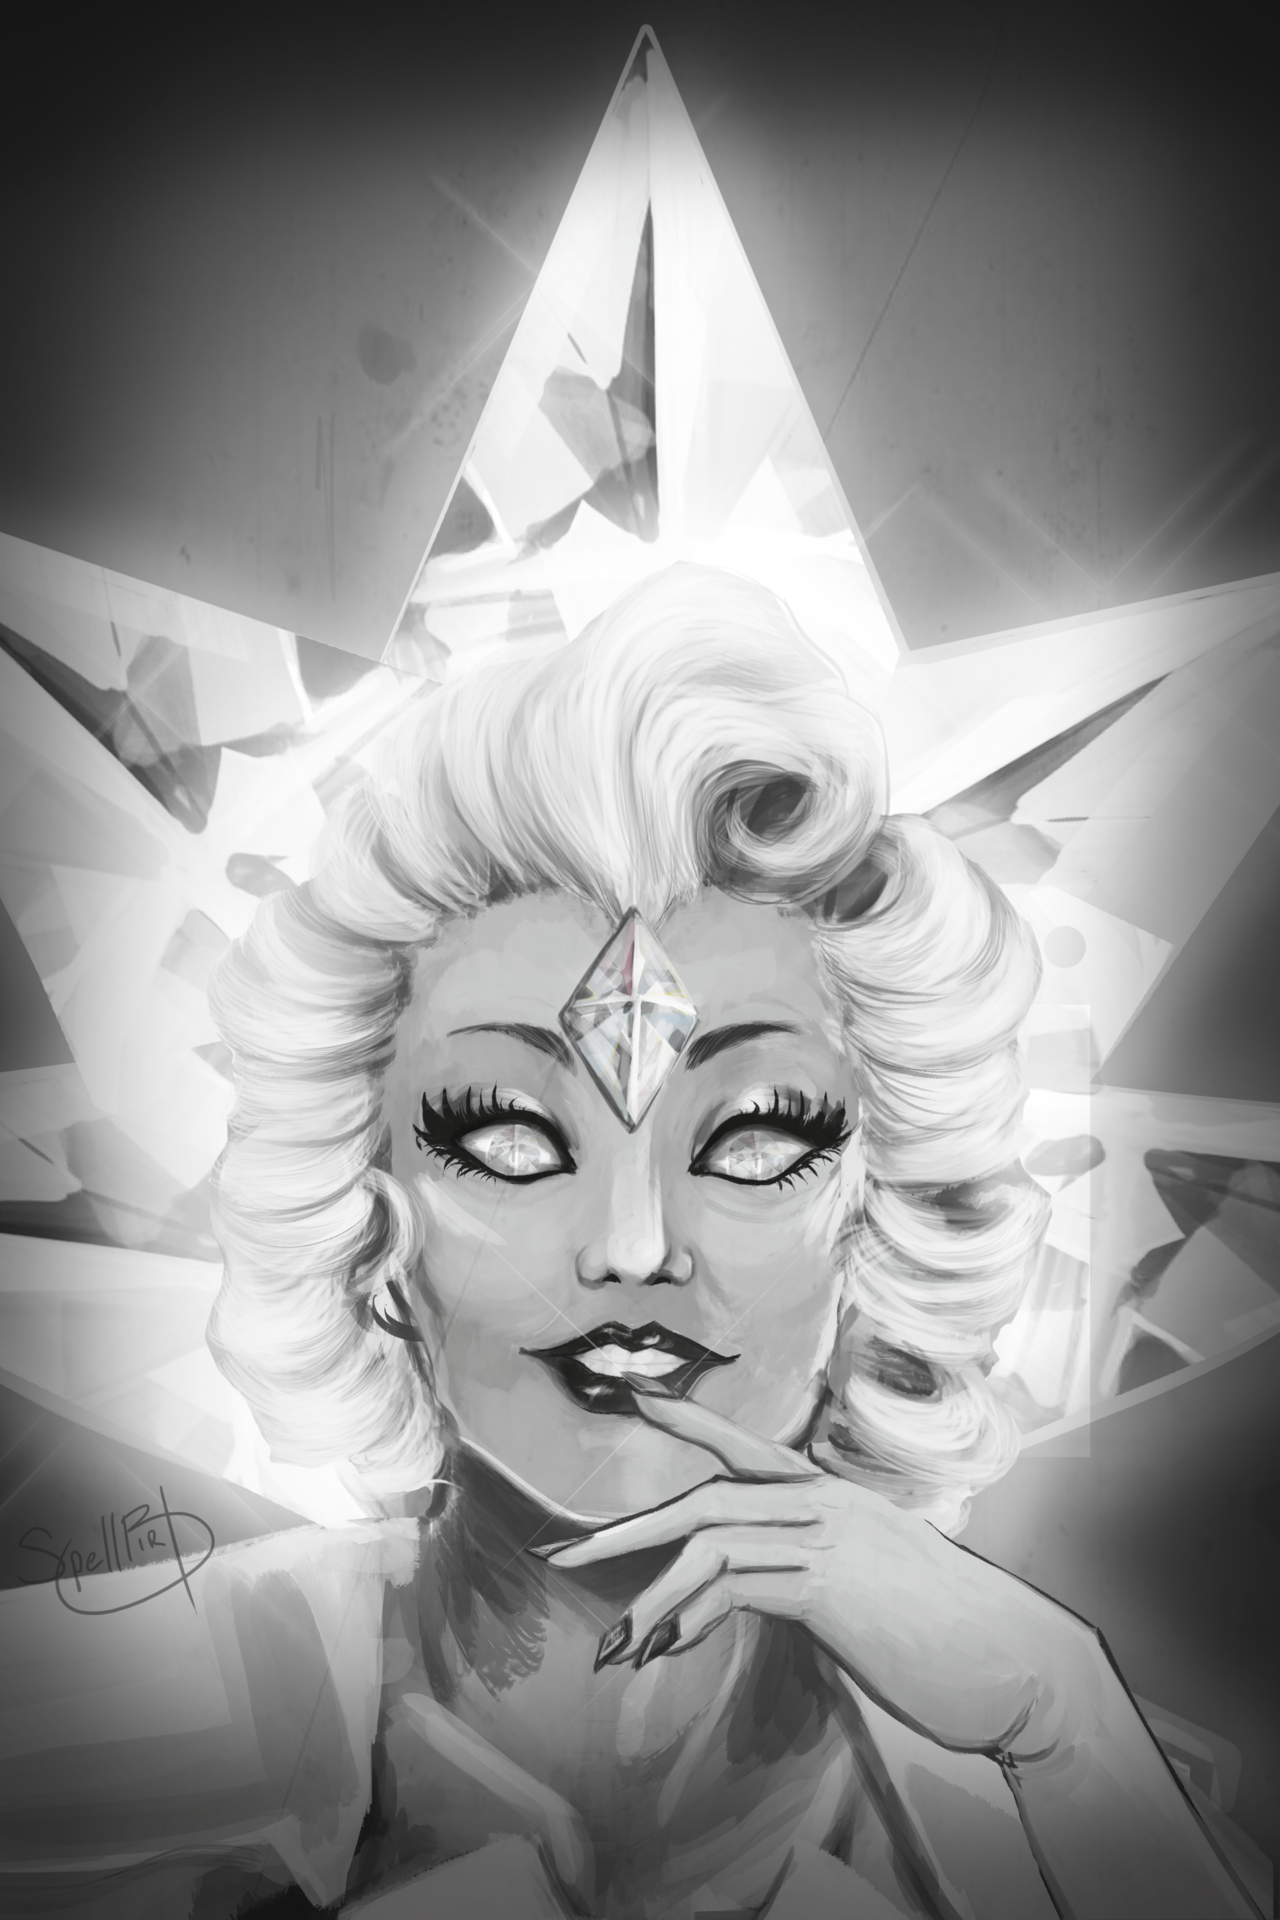 White Diamond gave me some cool 60s TV vibes.